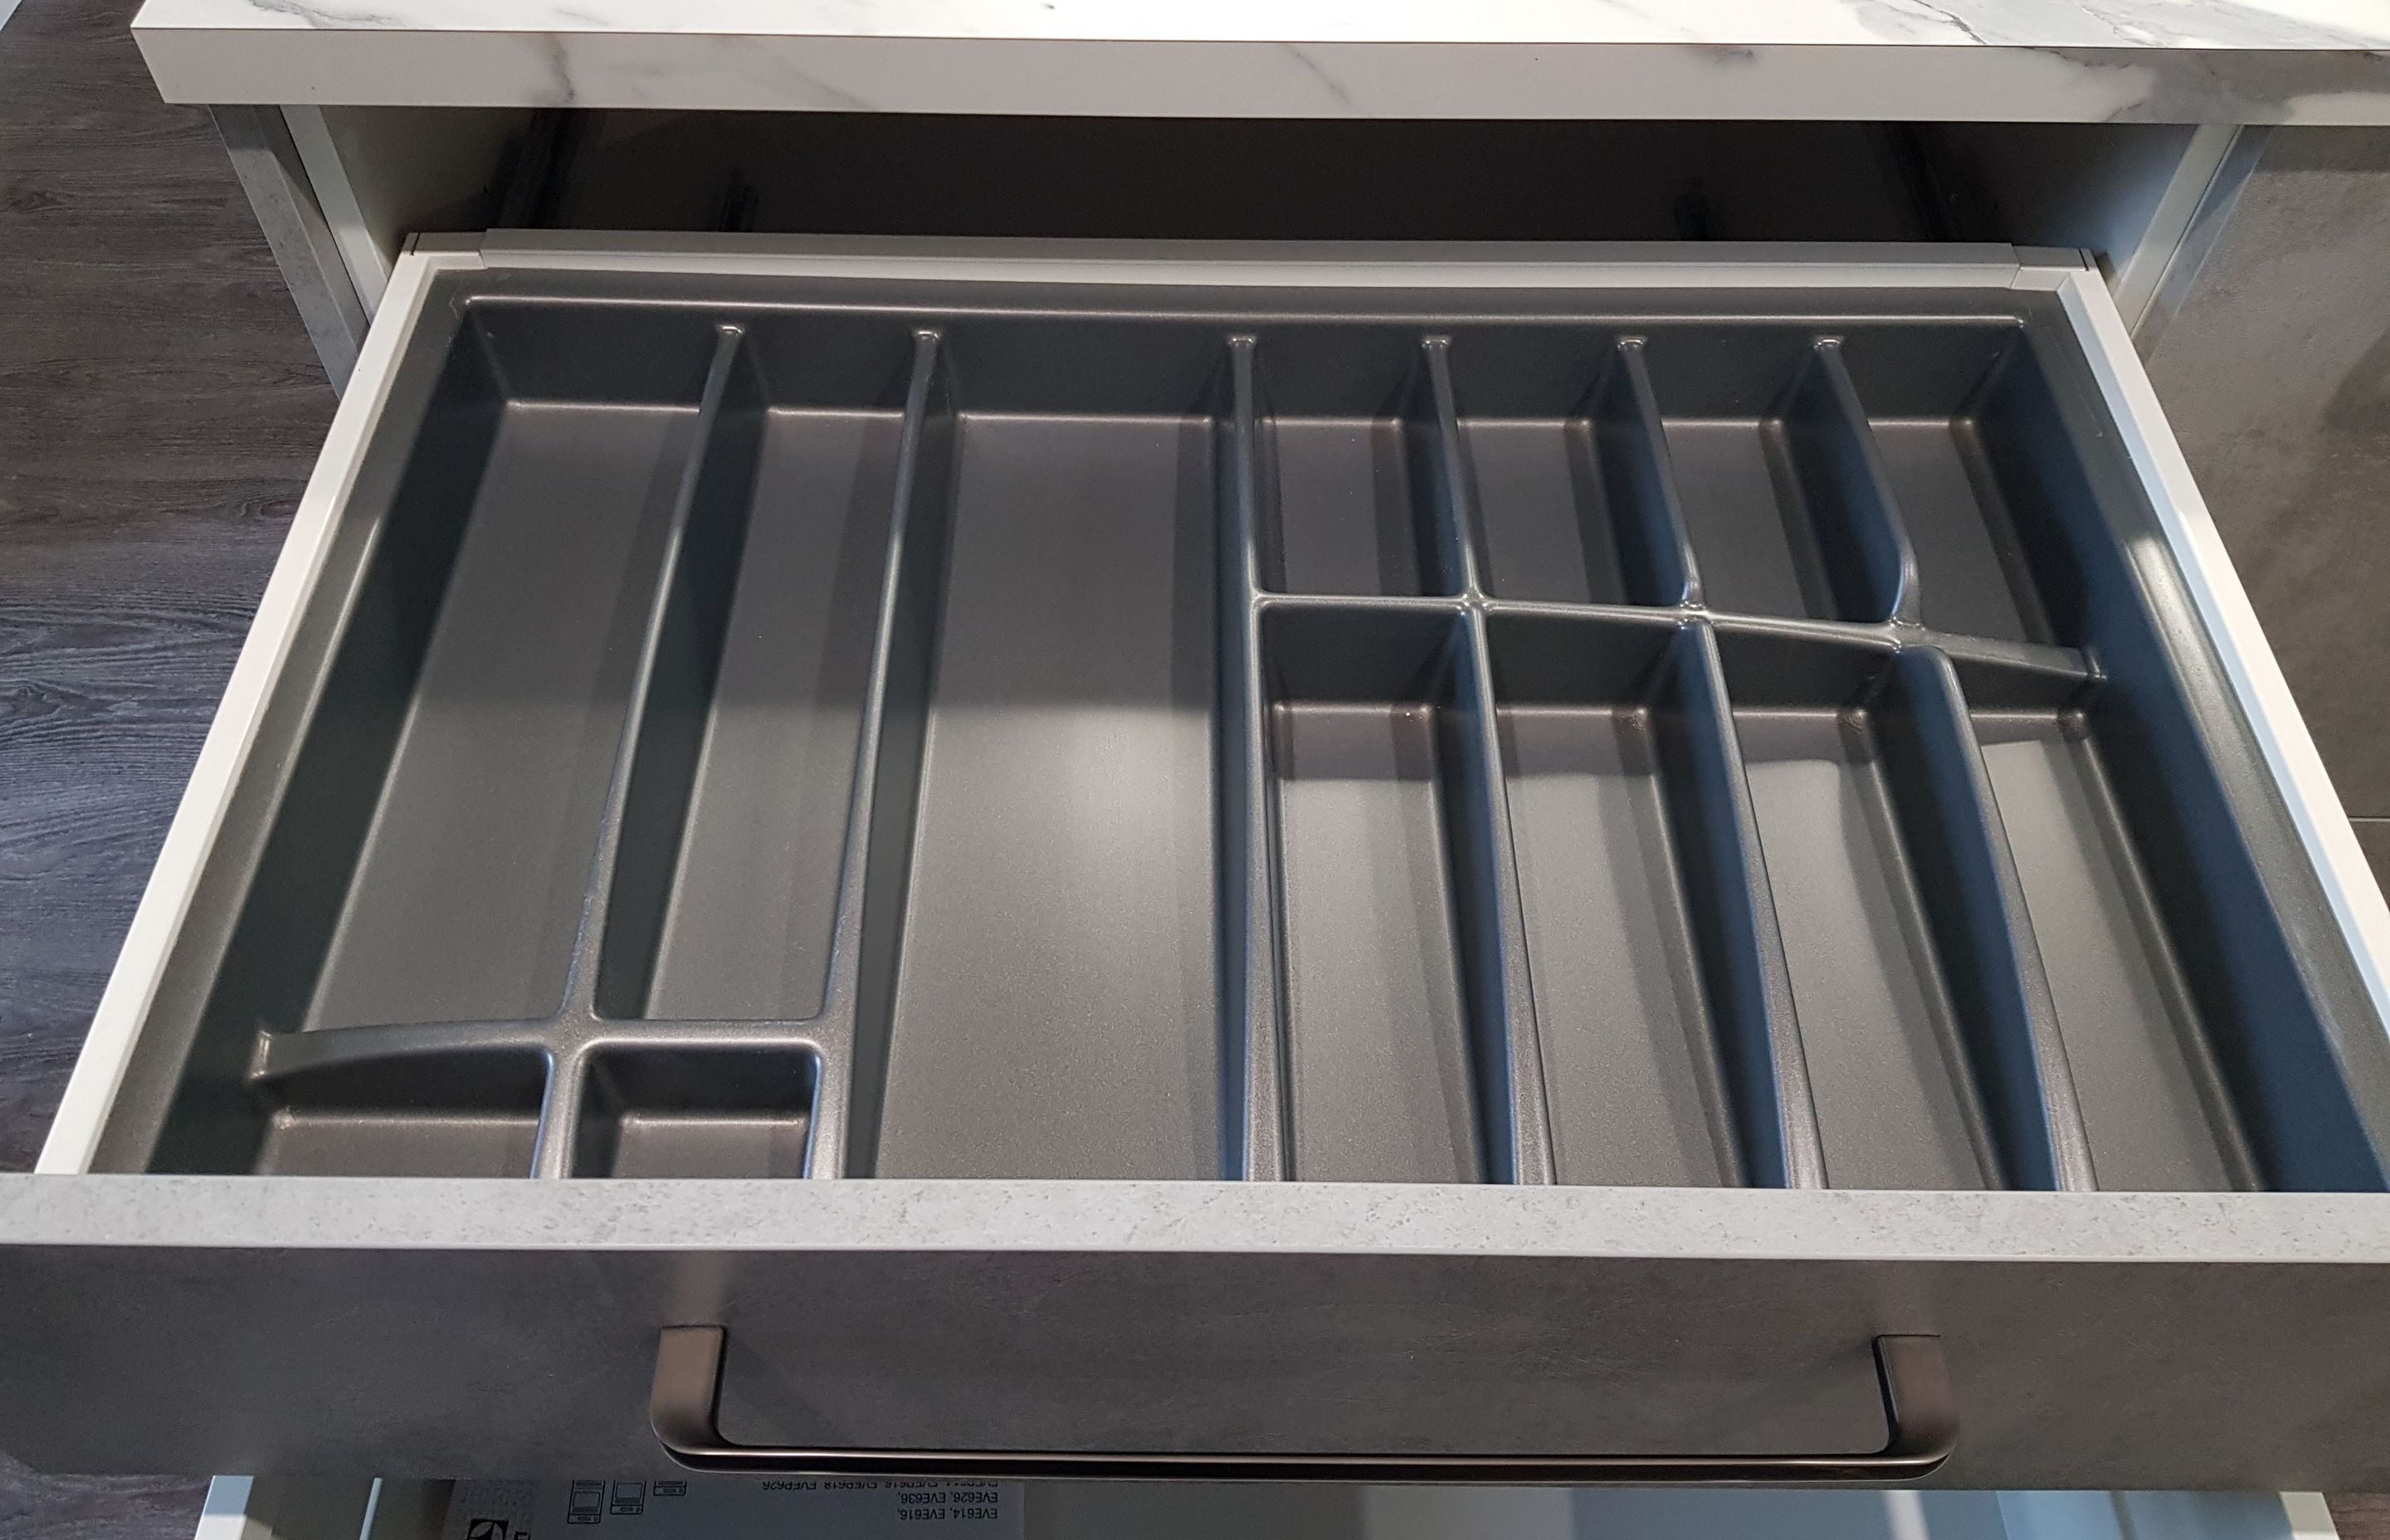 Plastika Cutlery Drawer Organisers - Available for a Wide Range of Drawers Widths - Trimmable for a Perfect Fit